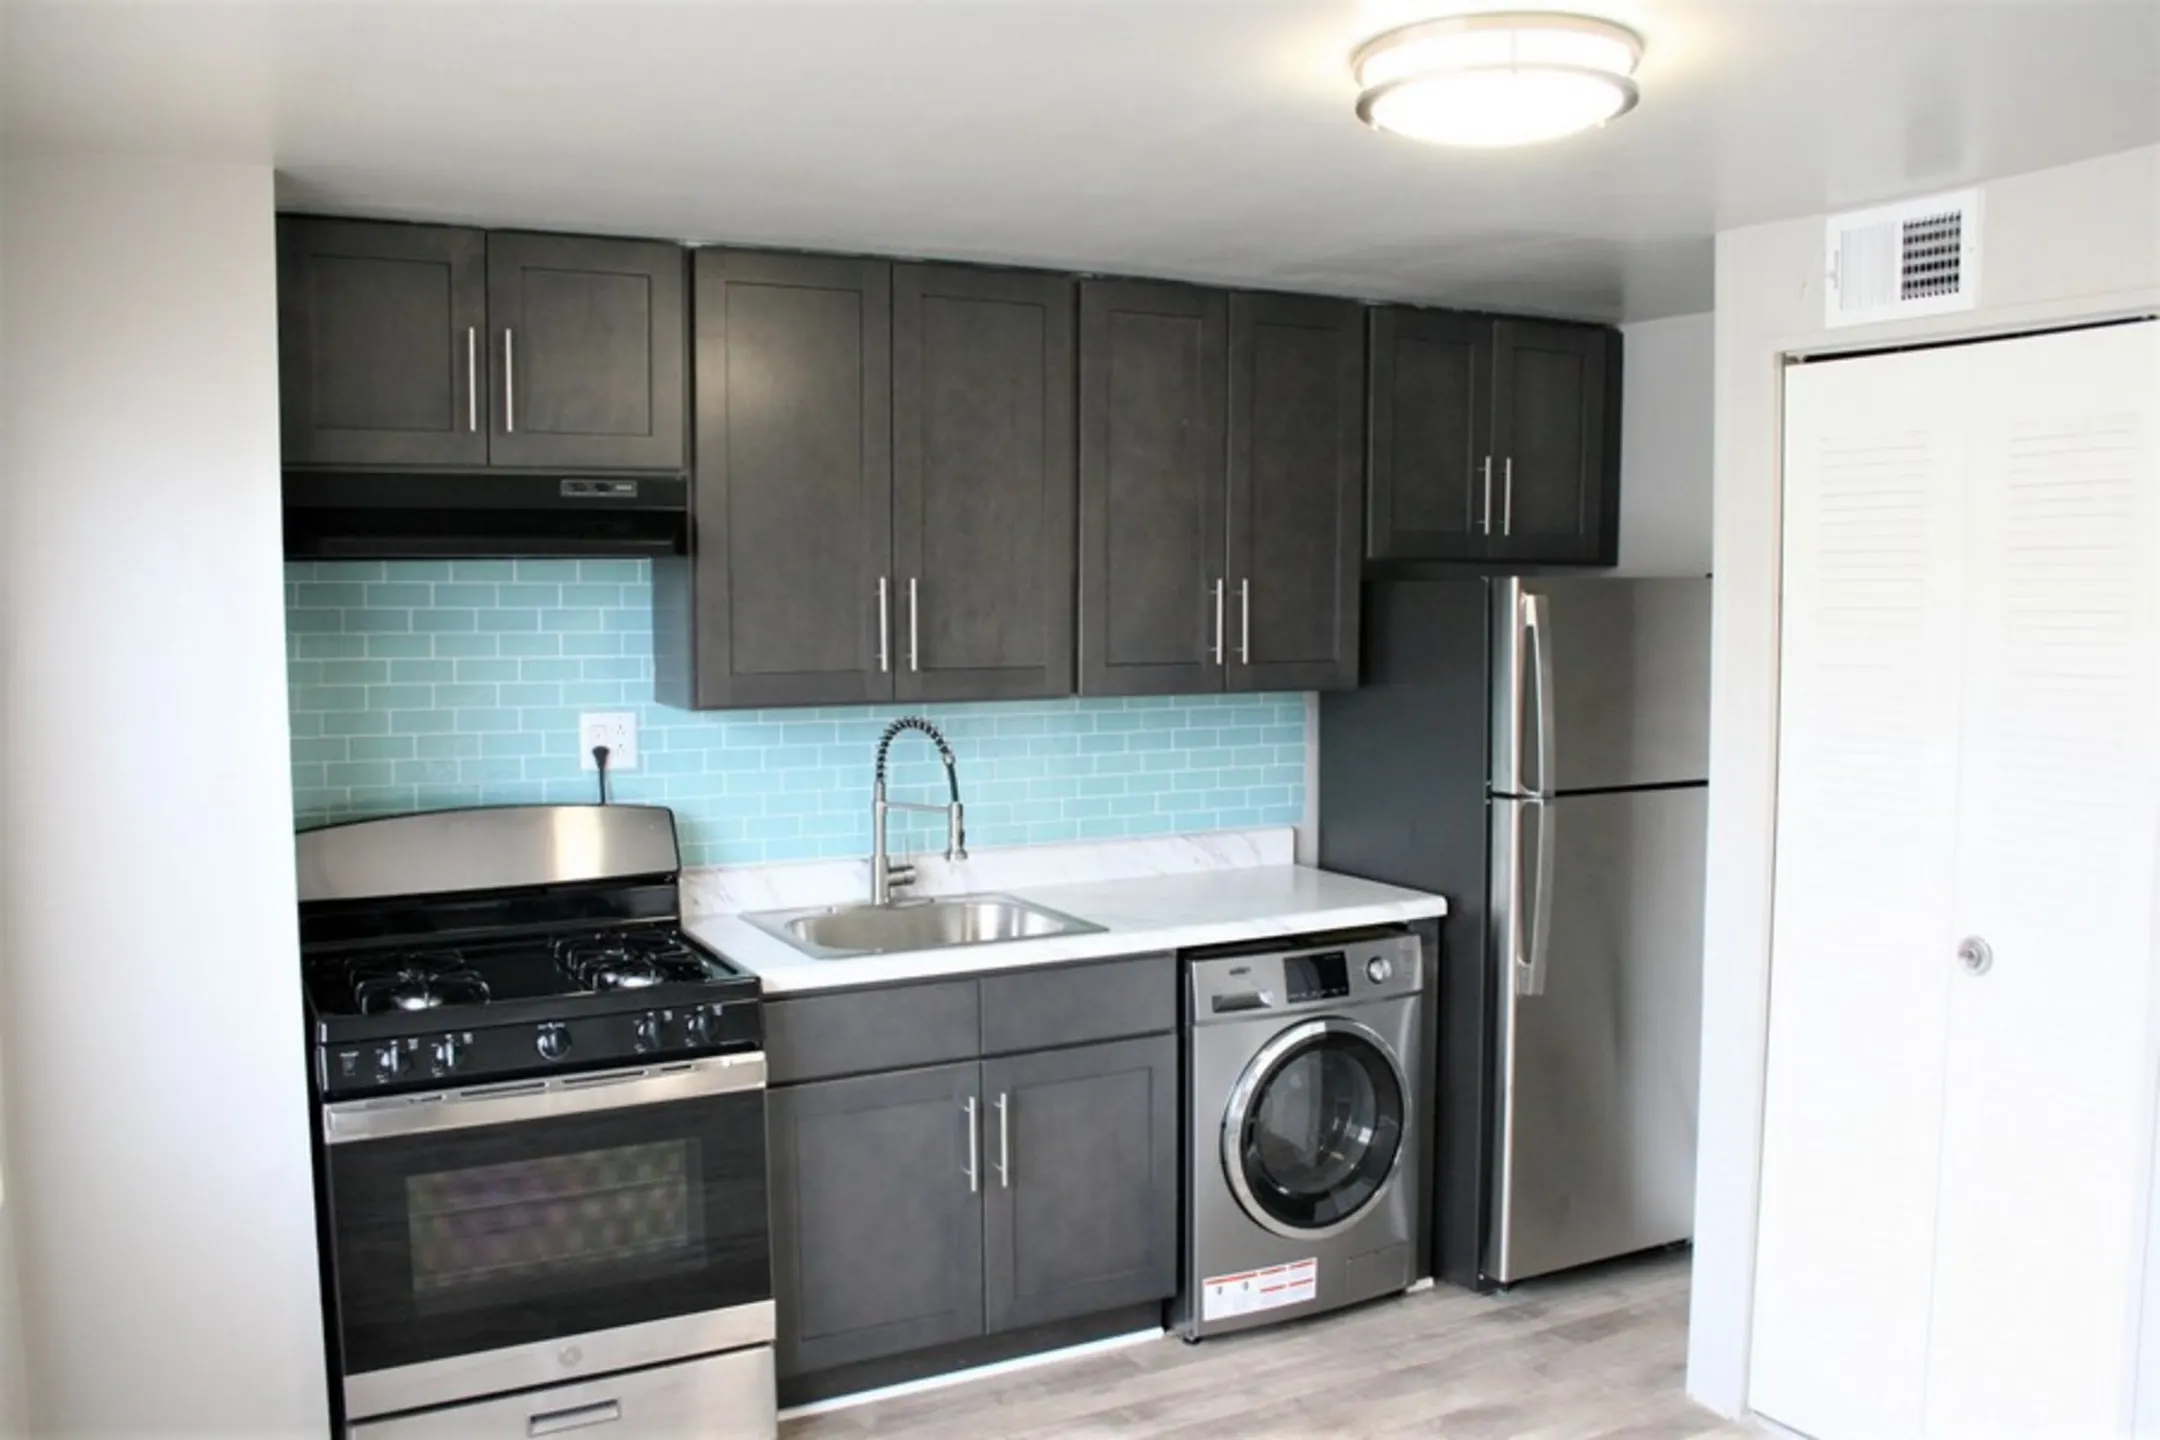 Kitchen - Water's Edge Townhomes - Halethorpe, MD